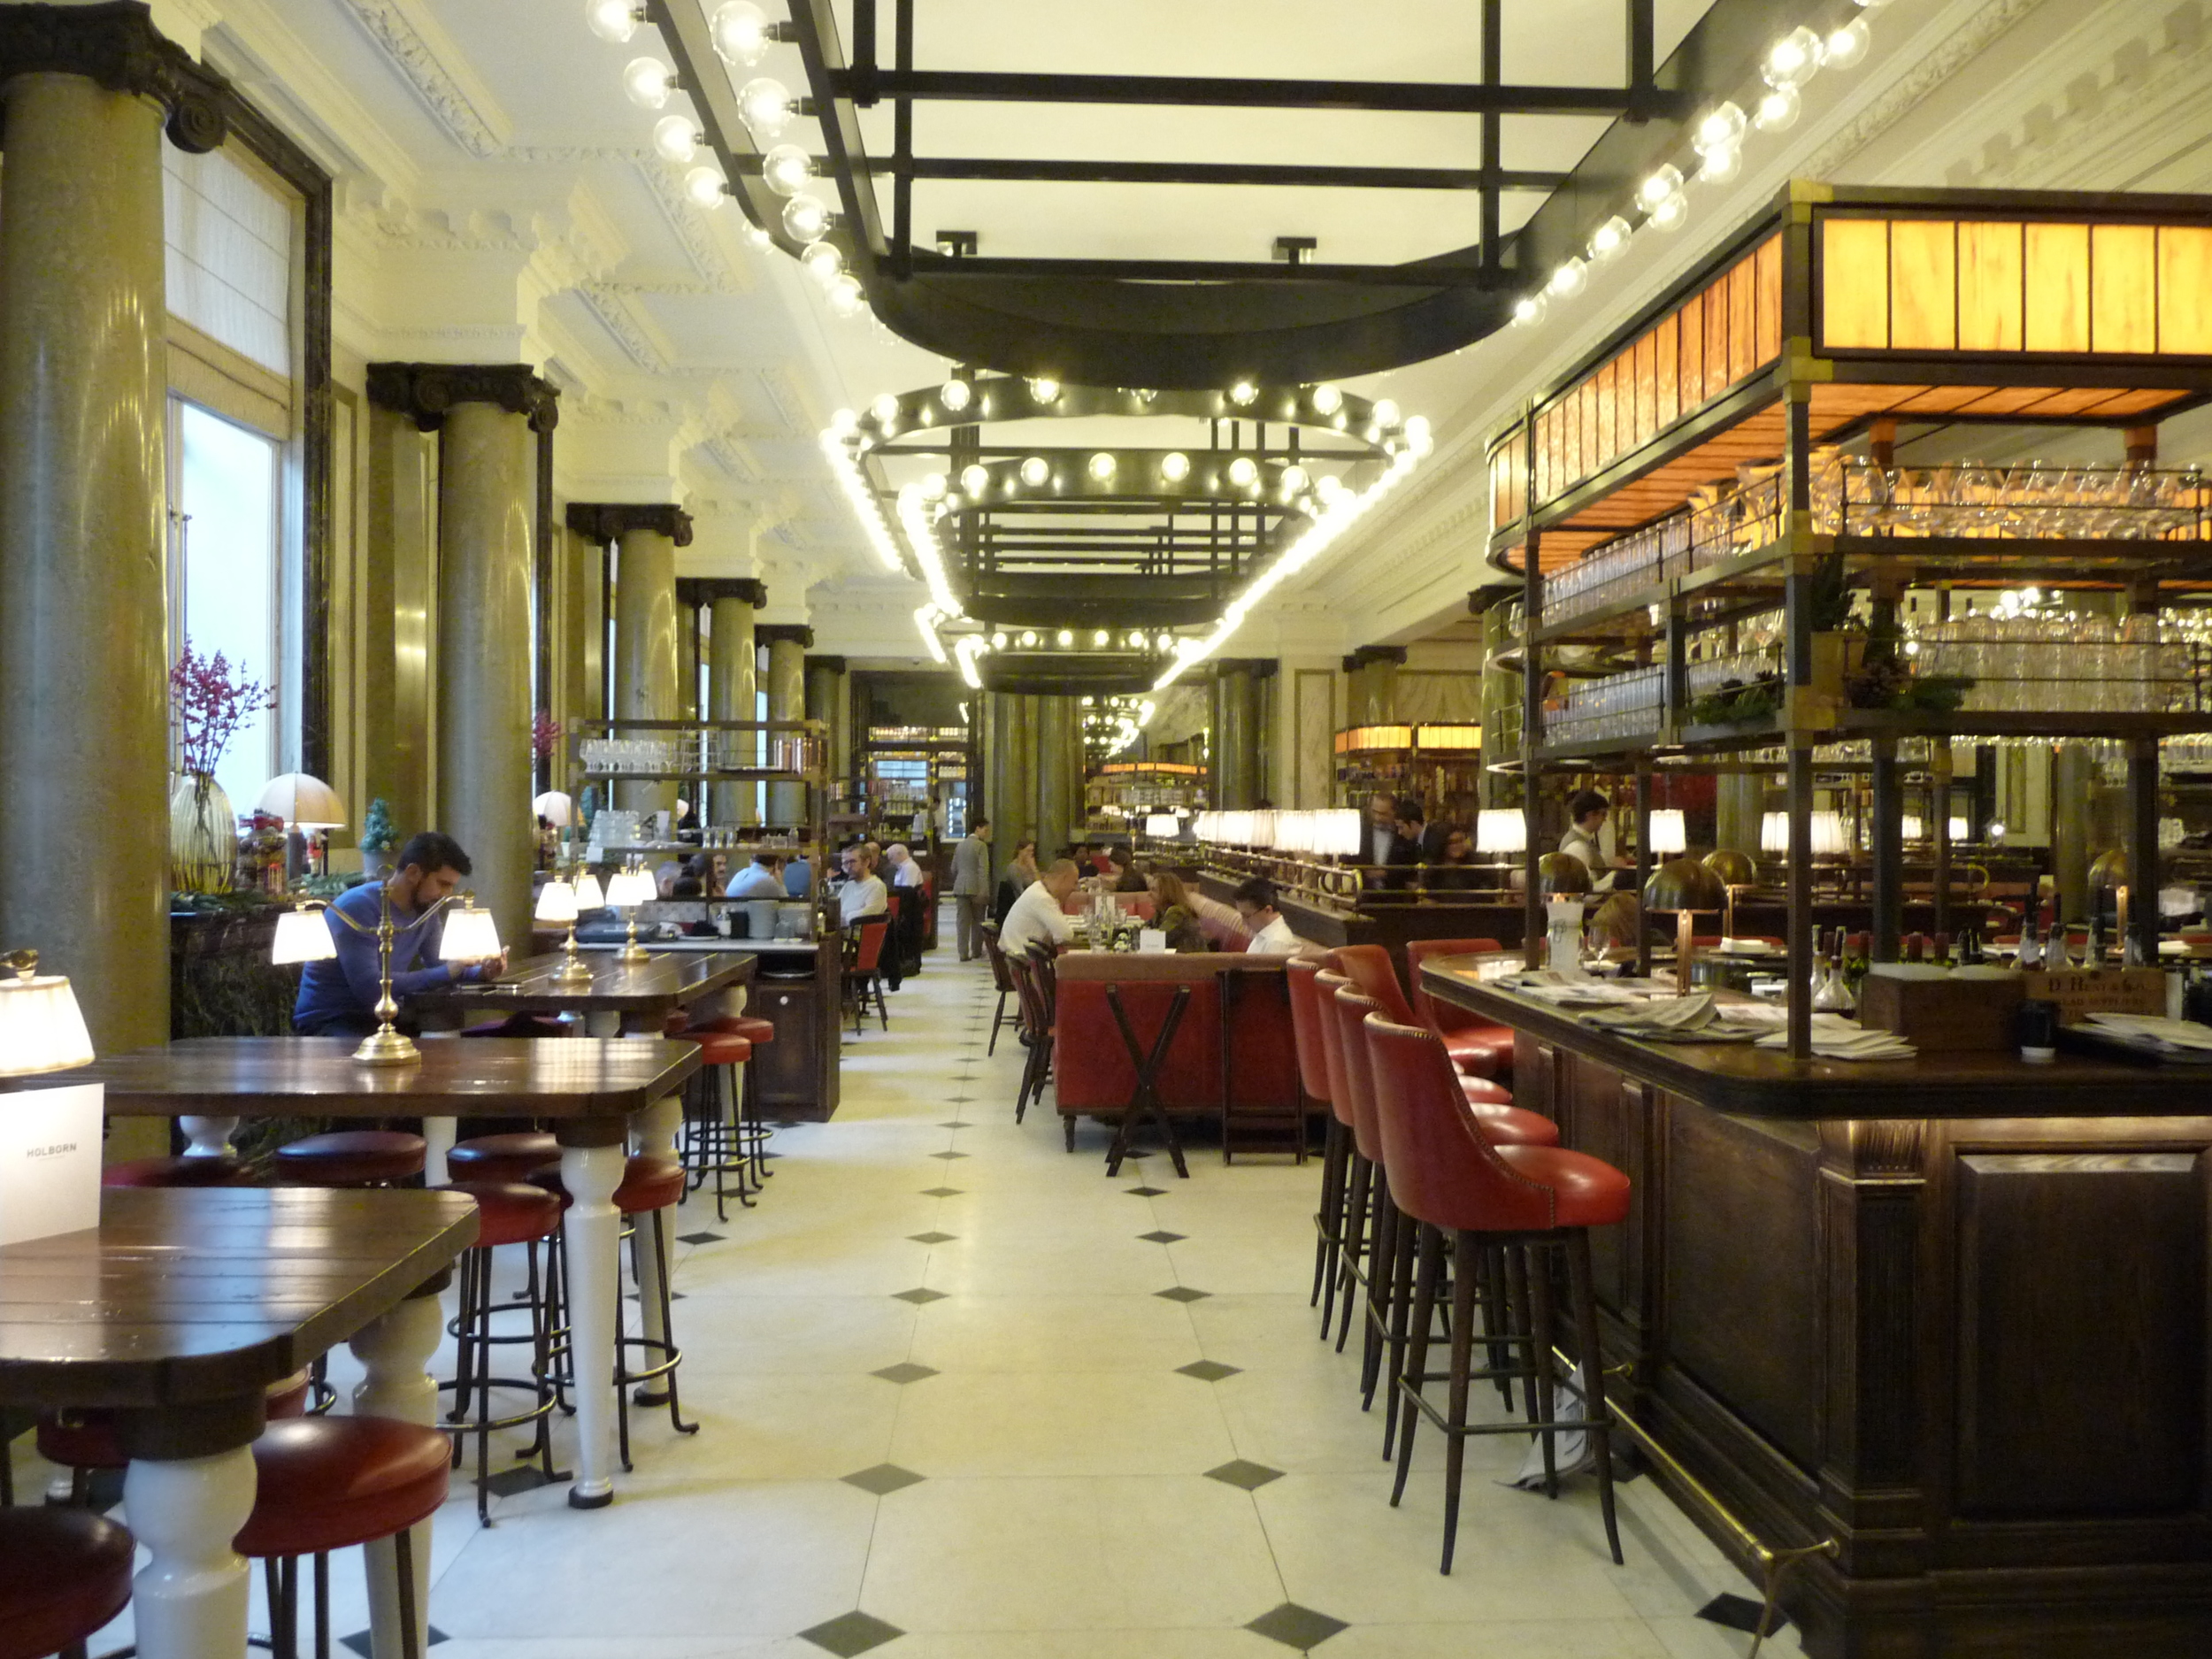  The stunning Holborn dining room&nbsp;restaurant where I had the most amazing three course supper 